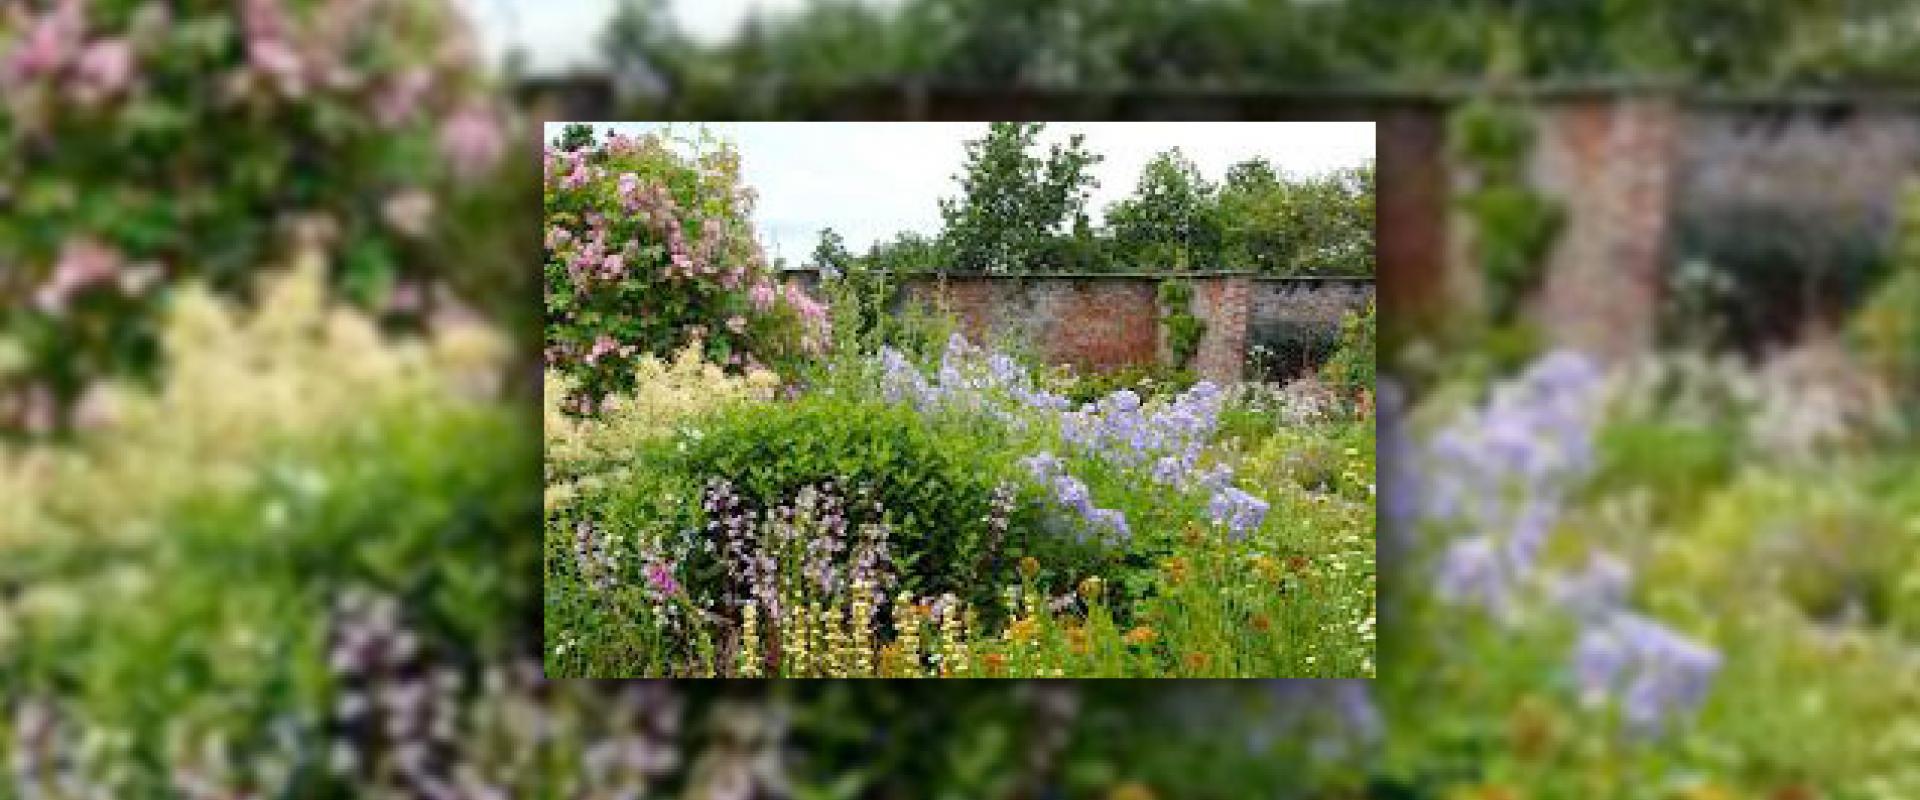 golygfa o'r blodau yng Ardd Beatrix Potter / view of the flowers within the Beatrix Potter Walled Garden